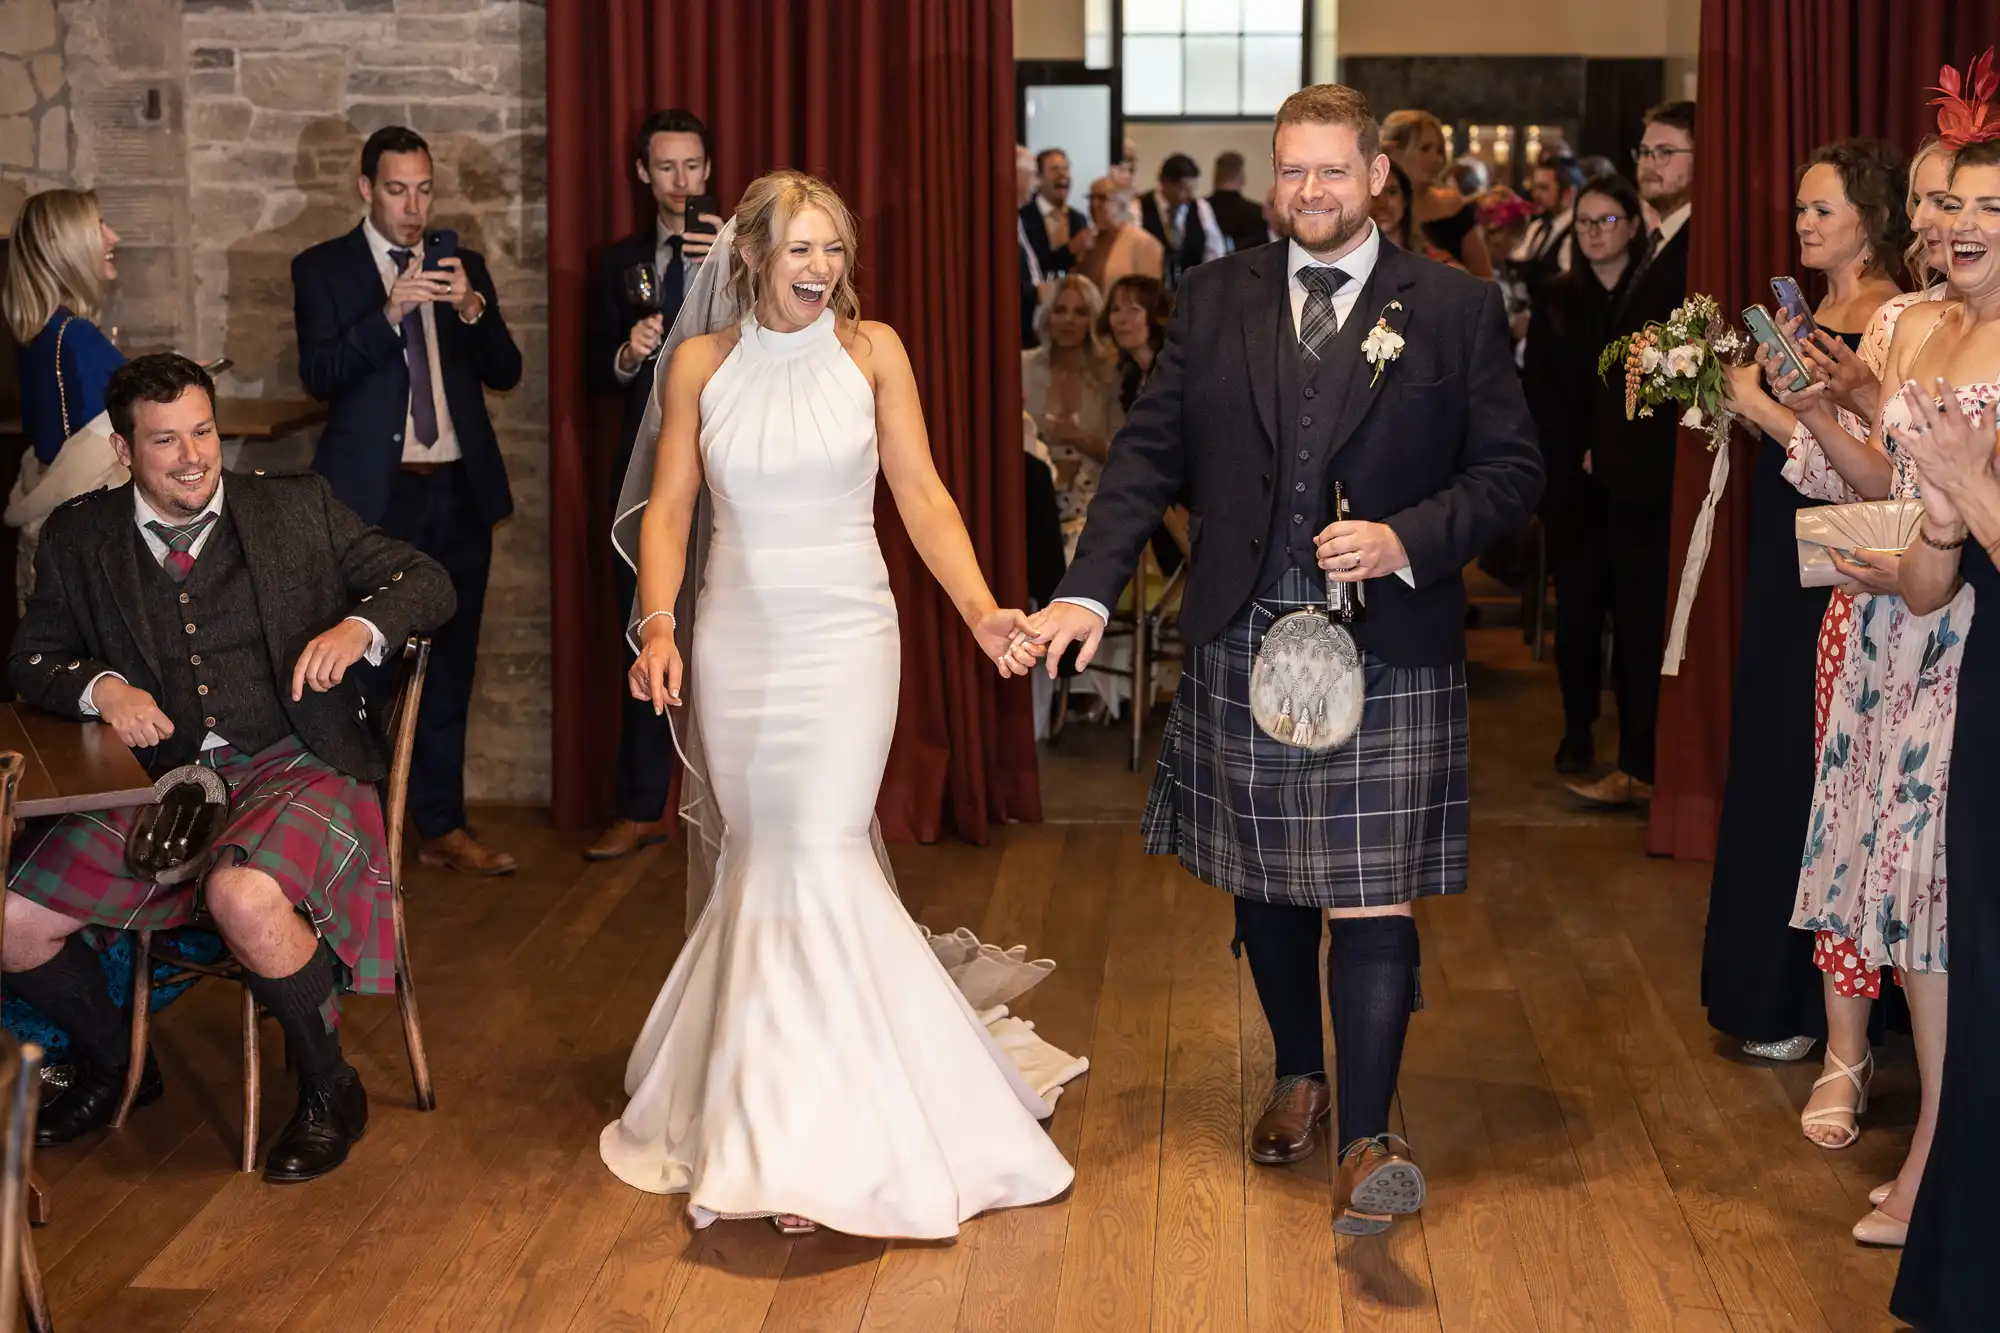 A bride in a white dress and a groom in a kilt smiling as they walk hand-in-hand through a crowd of cheering guests at a wedding venue.